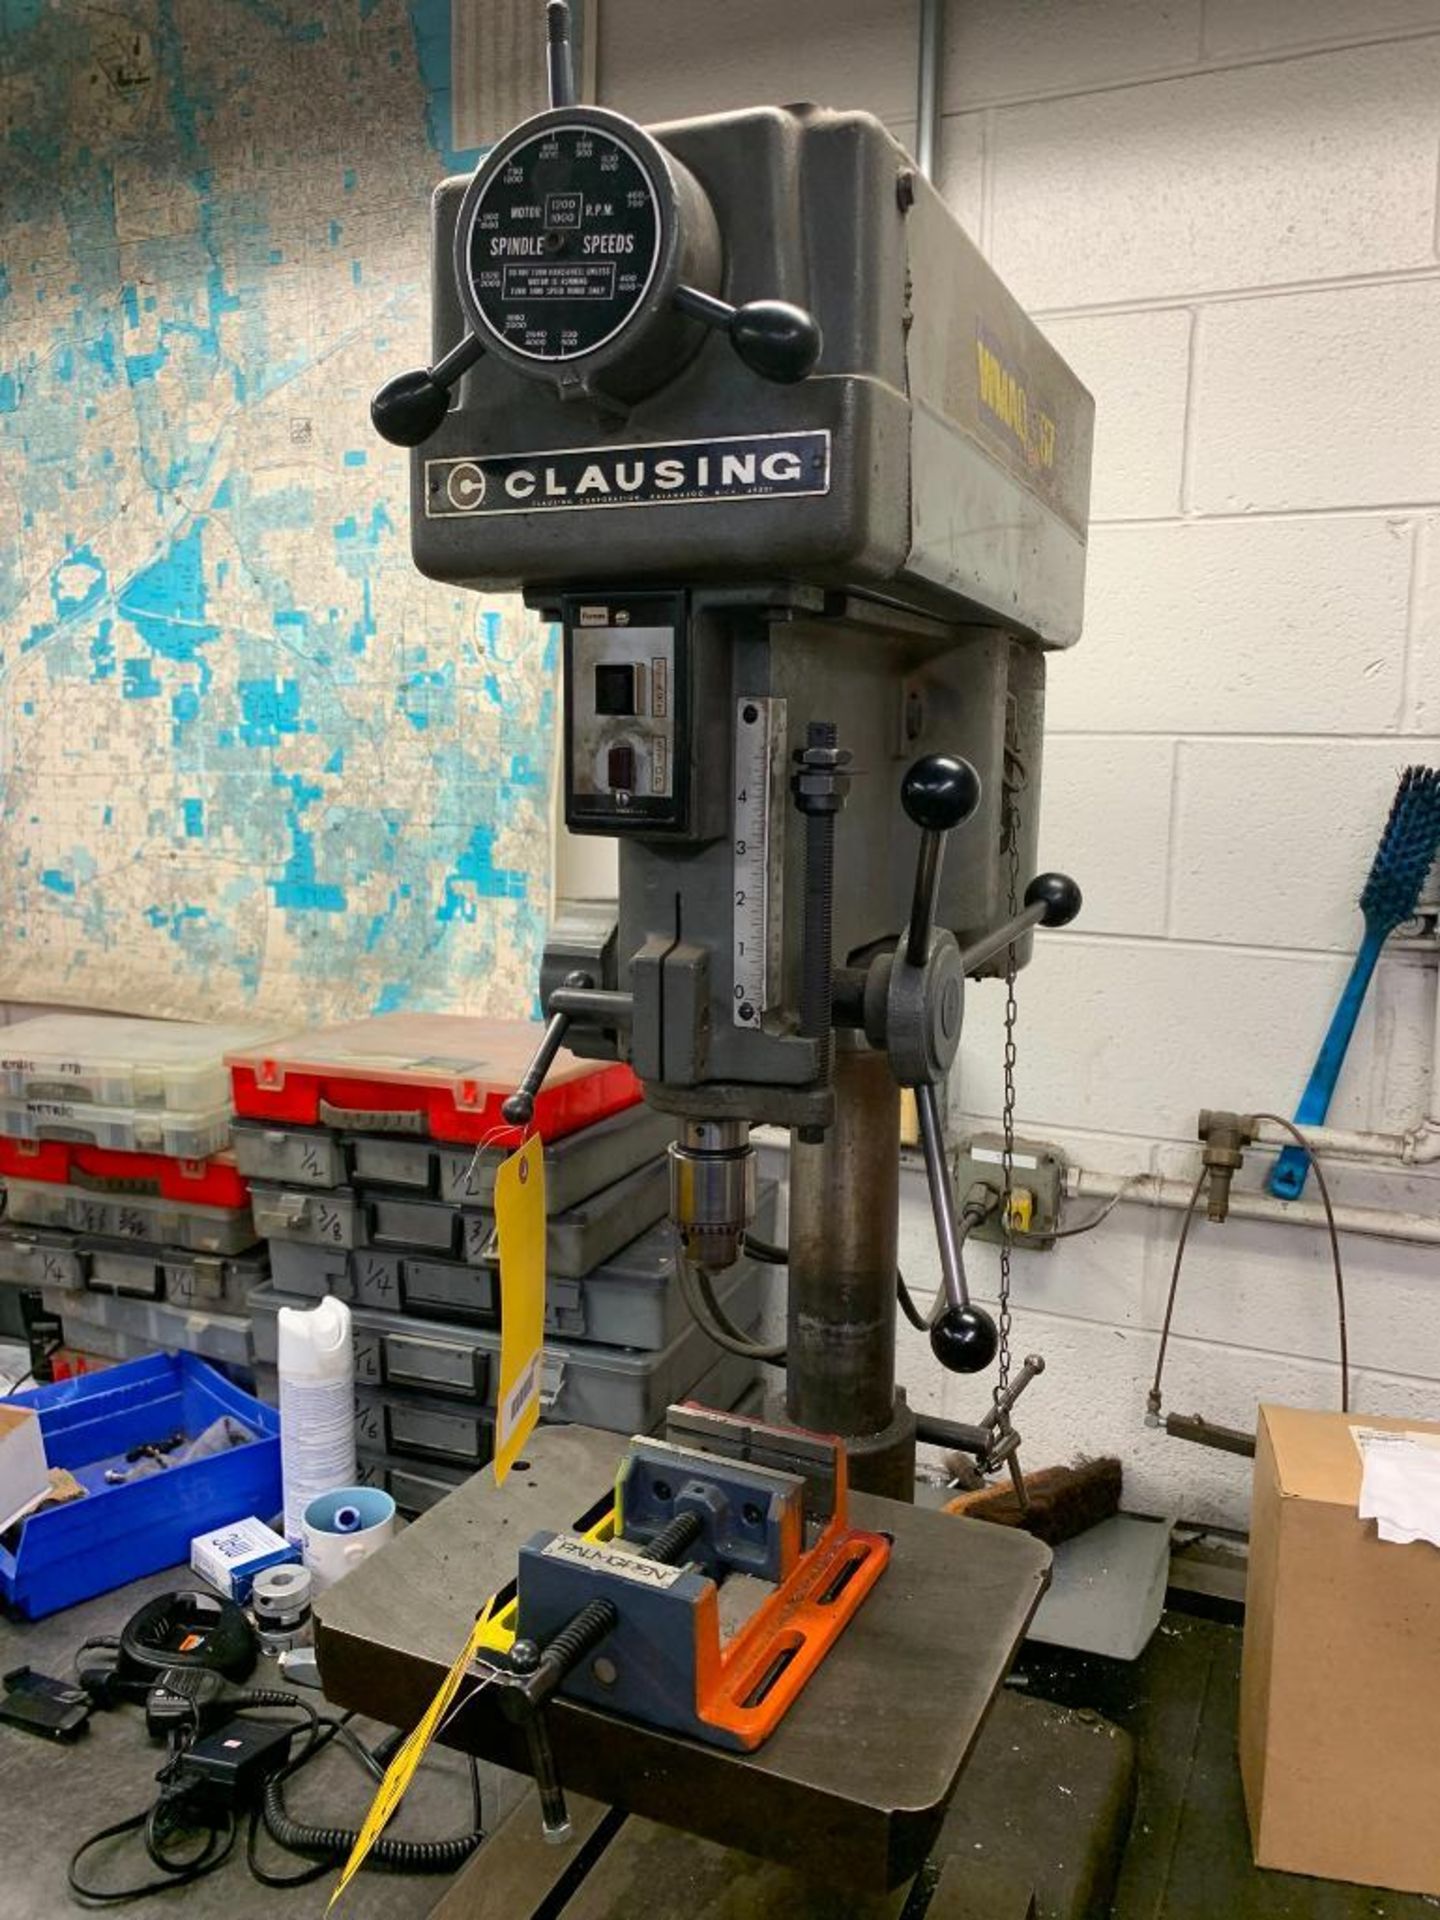 Clausing Tabletop Drill Press, Model 1680, 10" X 14" Table, Palmgren 4" Machine Vice, S/N 531293